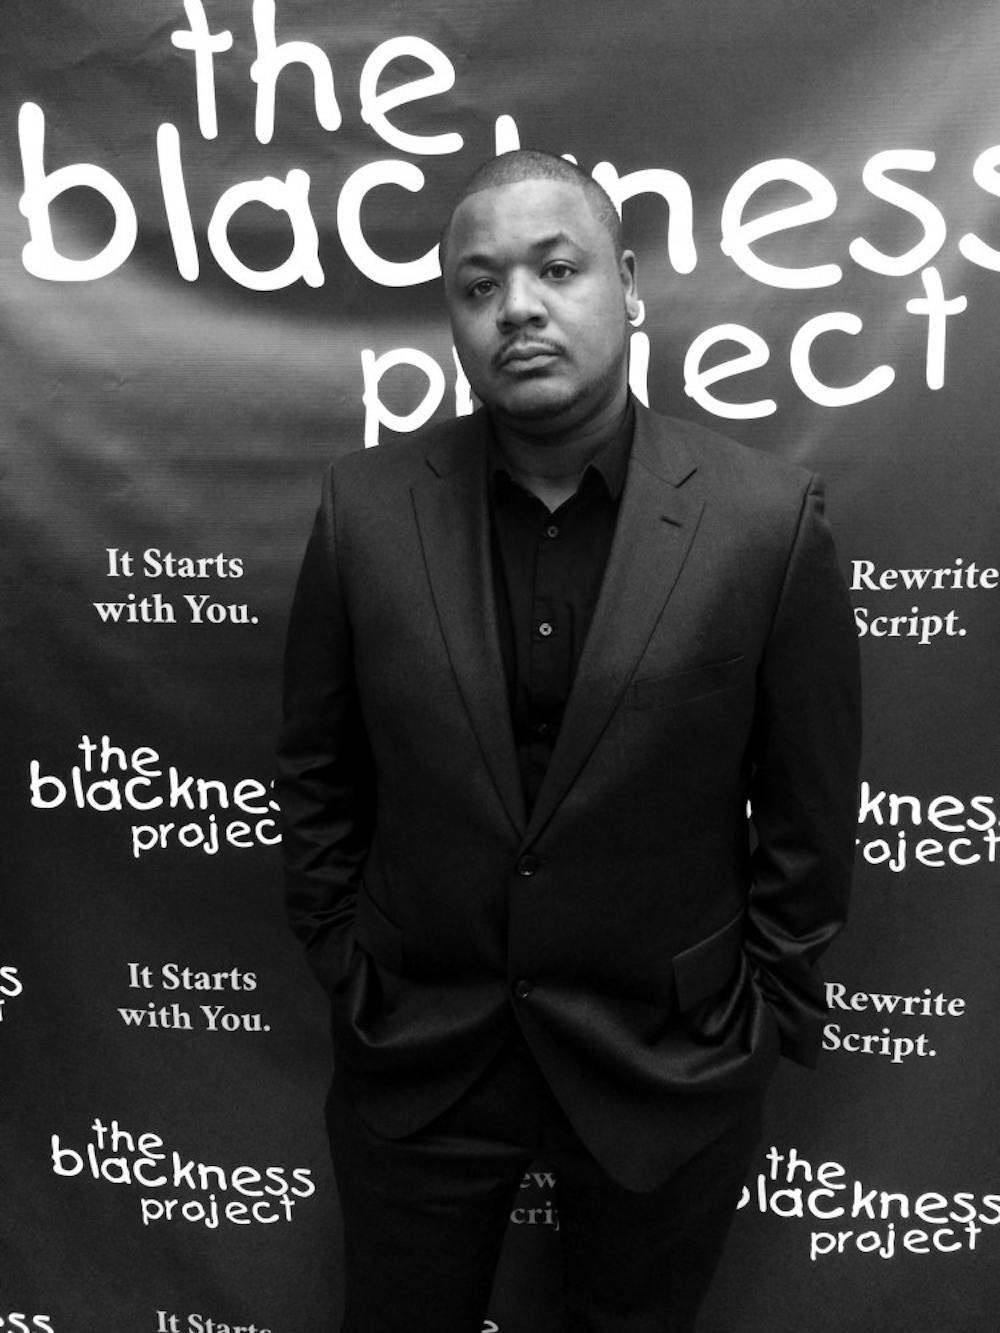 <p>Korey Green, a local filmmaker and head of Black Rose Production House, is gearing up for the release of his film “The Blackness Project.” The film, expected for a late 2017 release, looks at the breadth of the black experience and features interviews from Buffalo & around the country.</p>